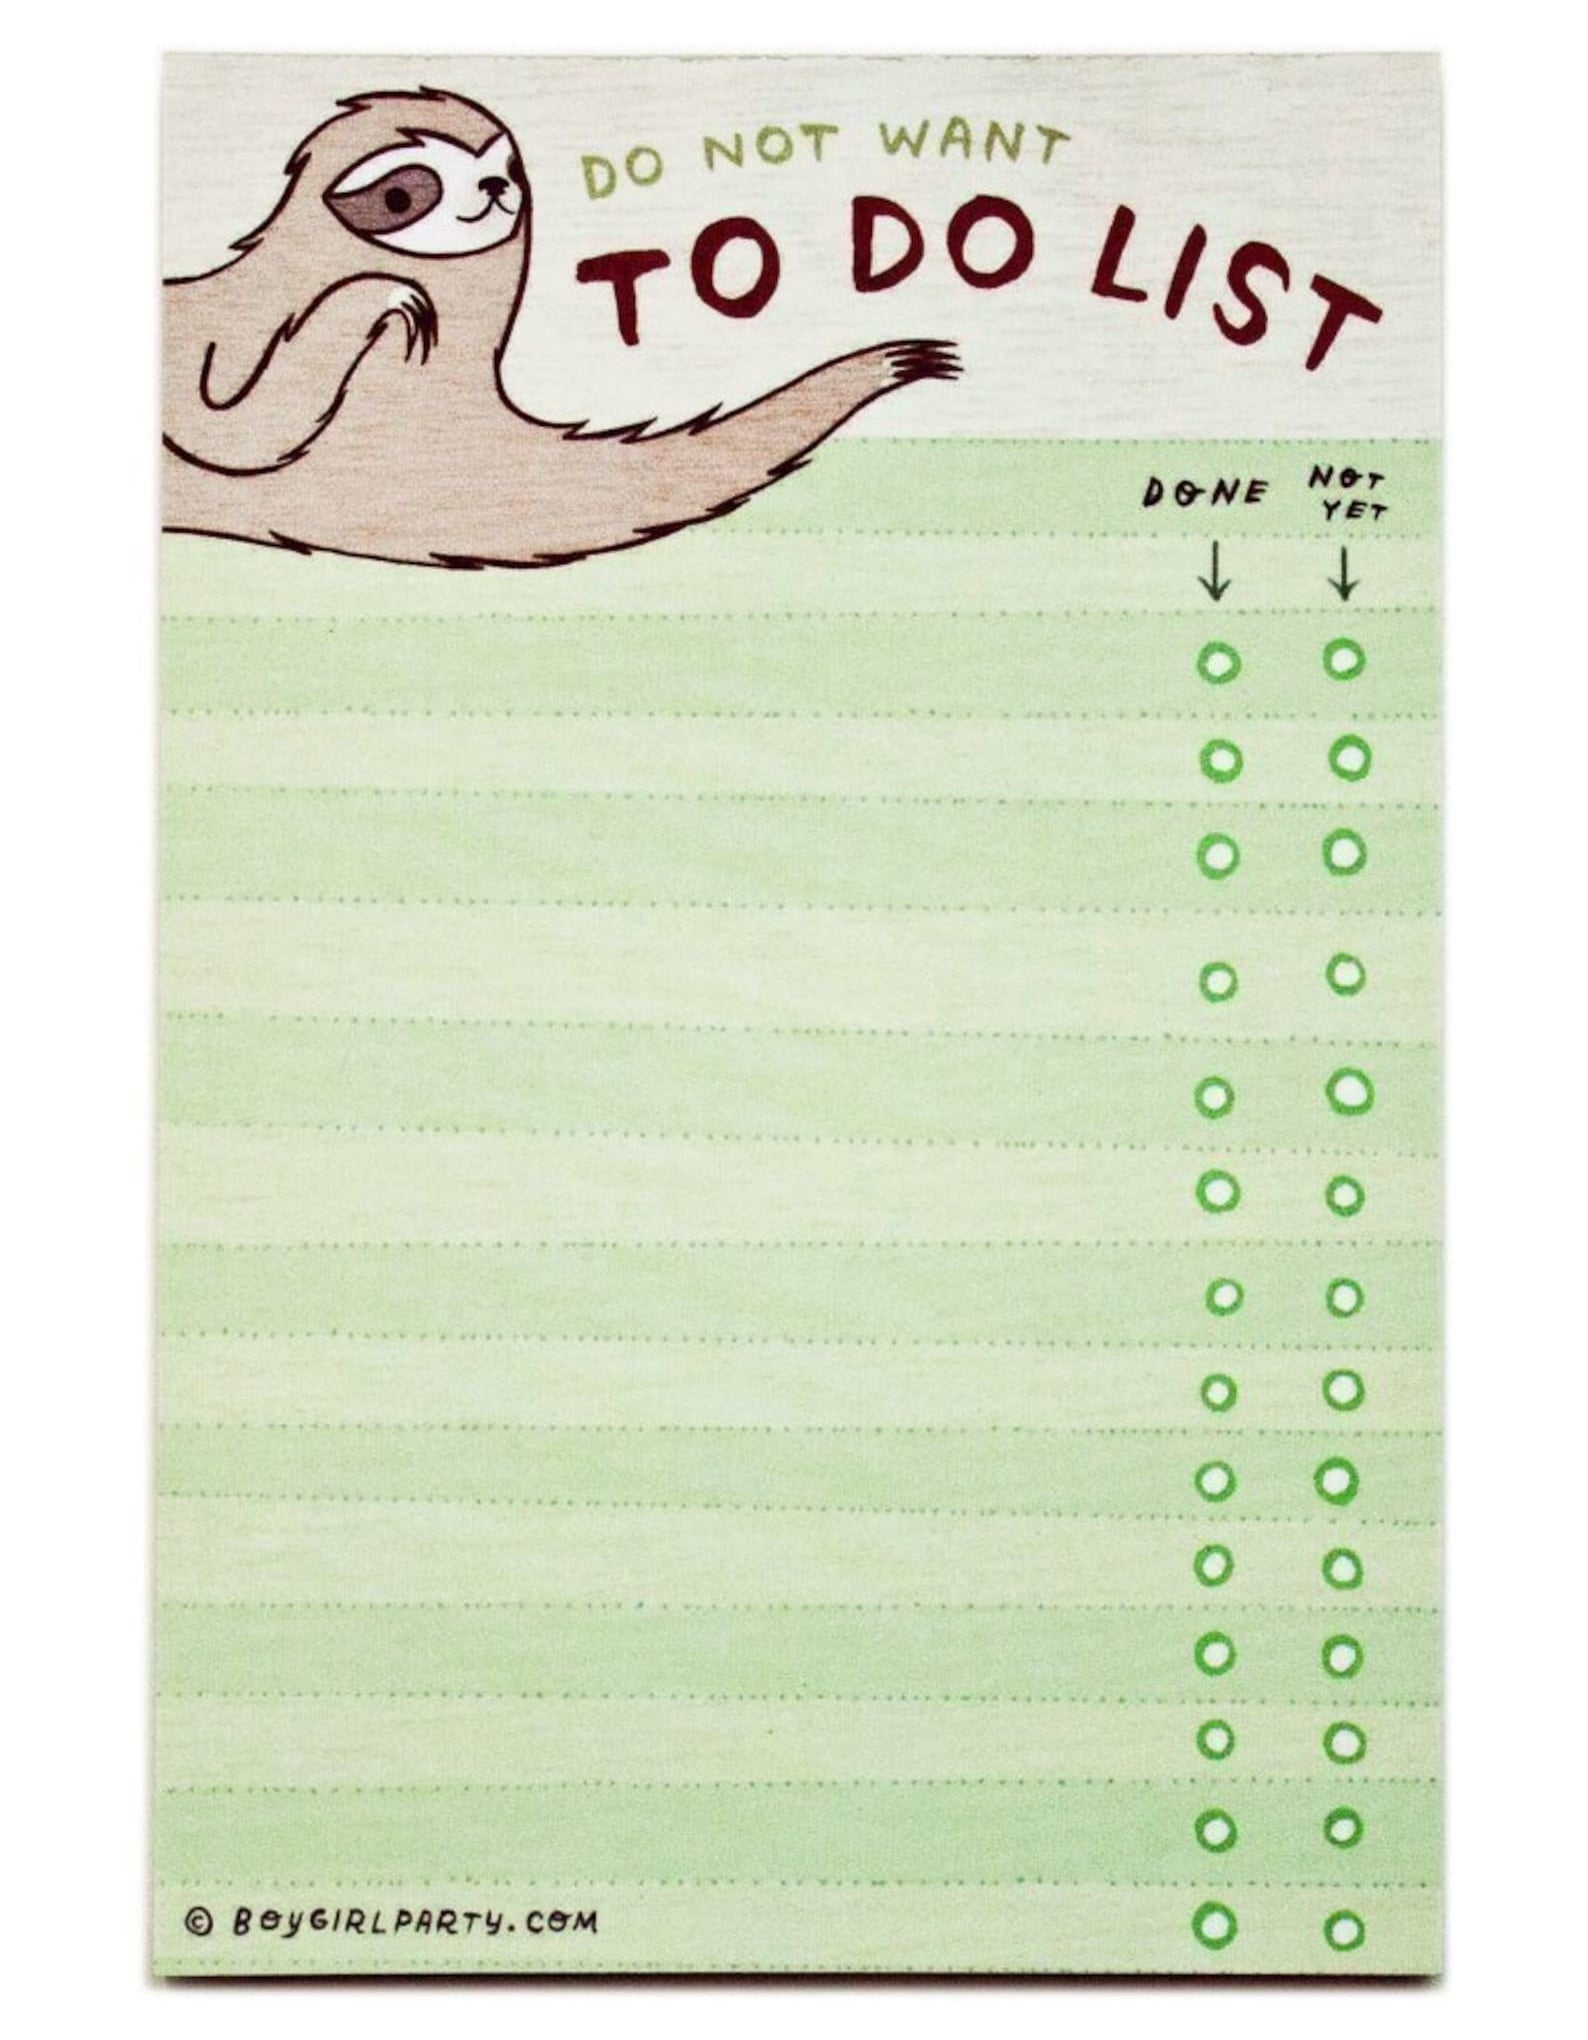 the green notepad, which says &quot;do not want to do list&quot; and has a sloth illustration in the top left corner